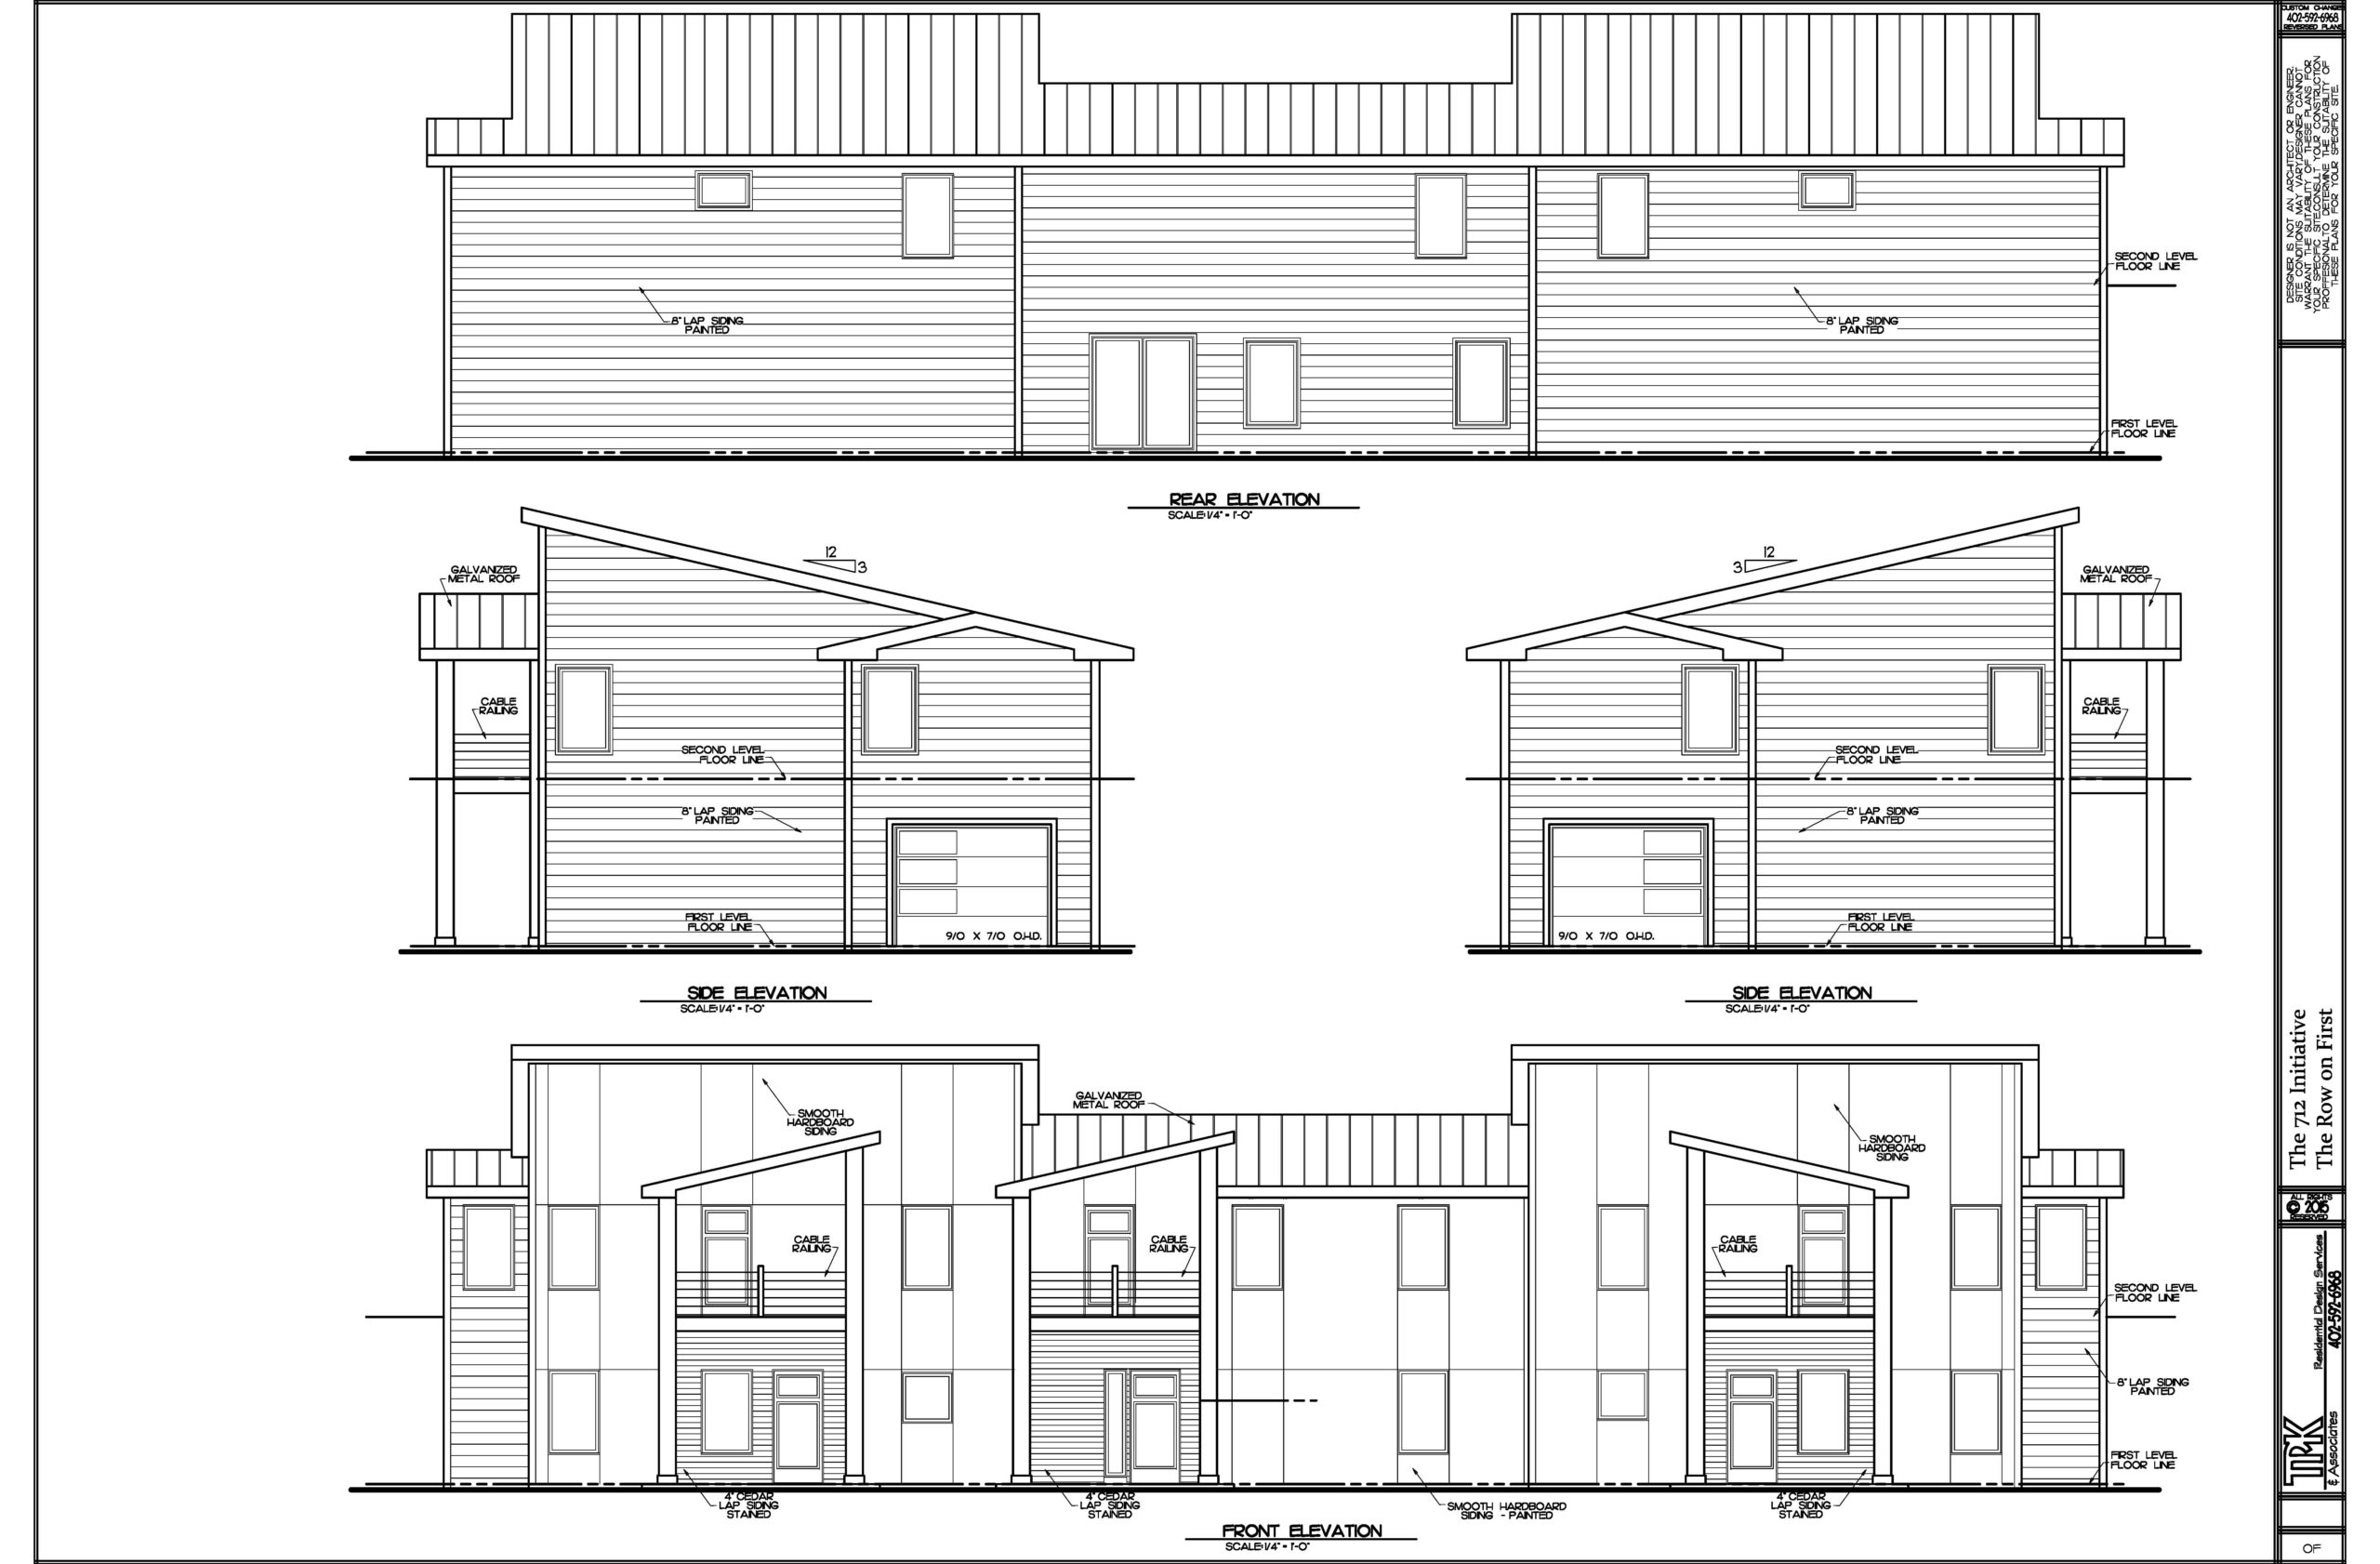 101 S 24th elevations